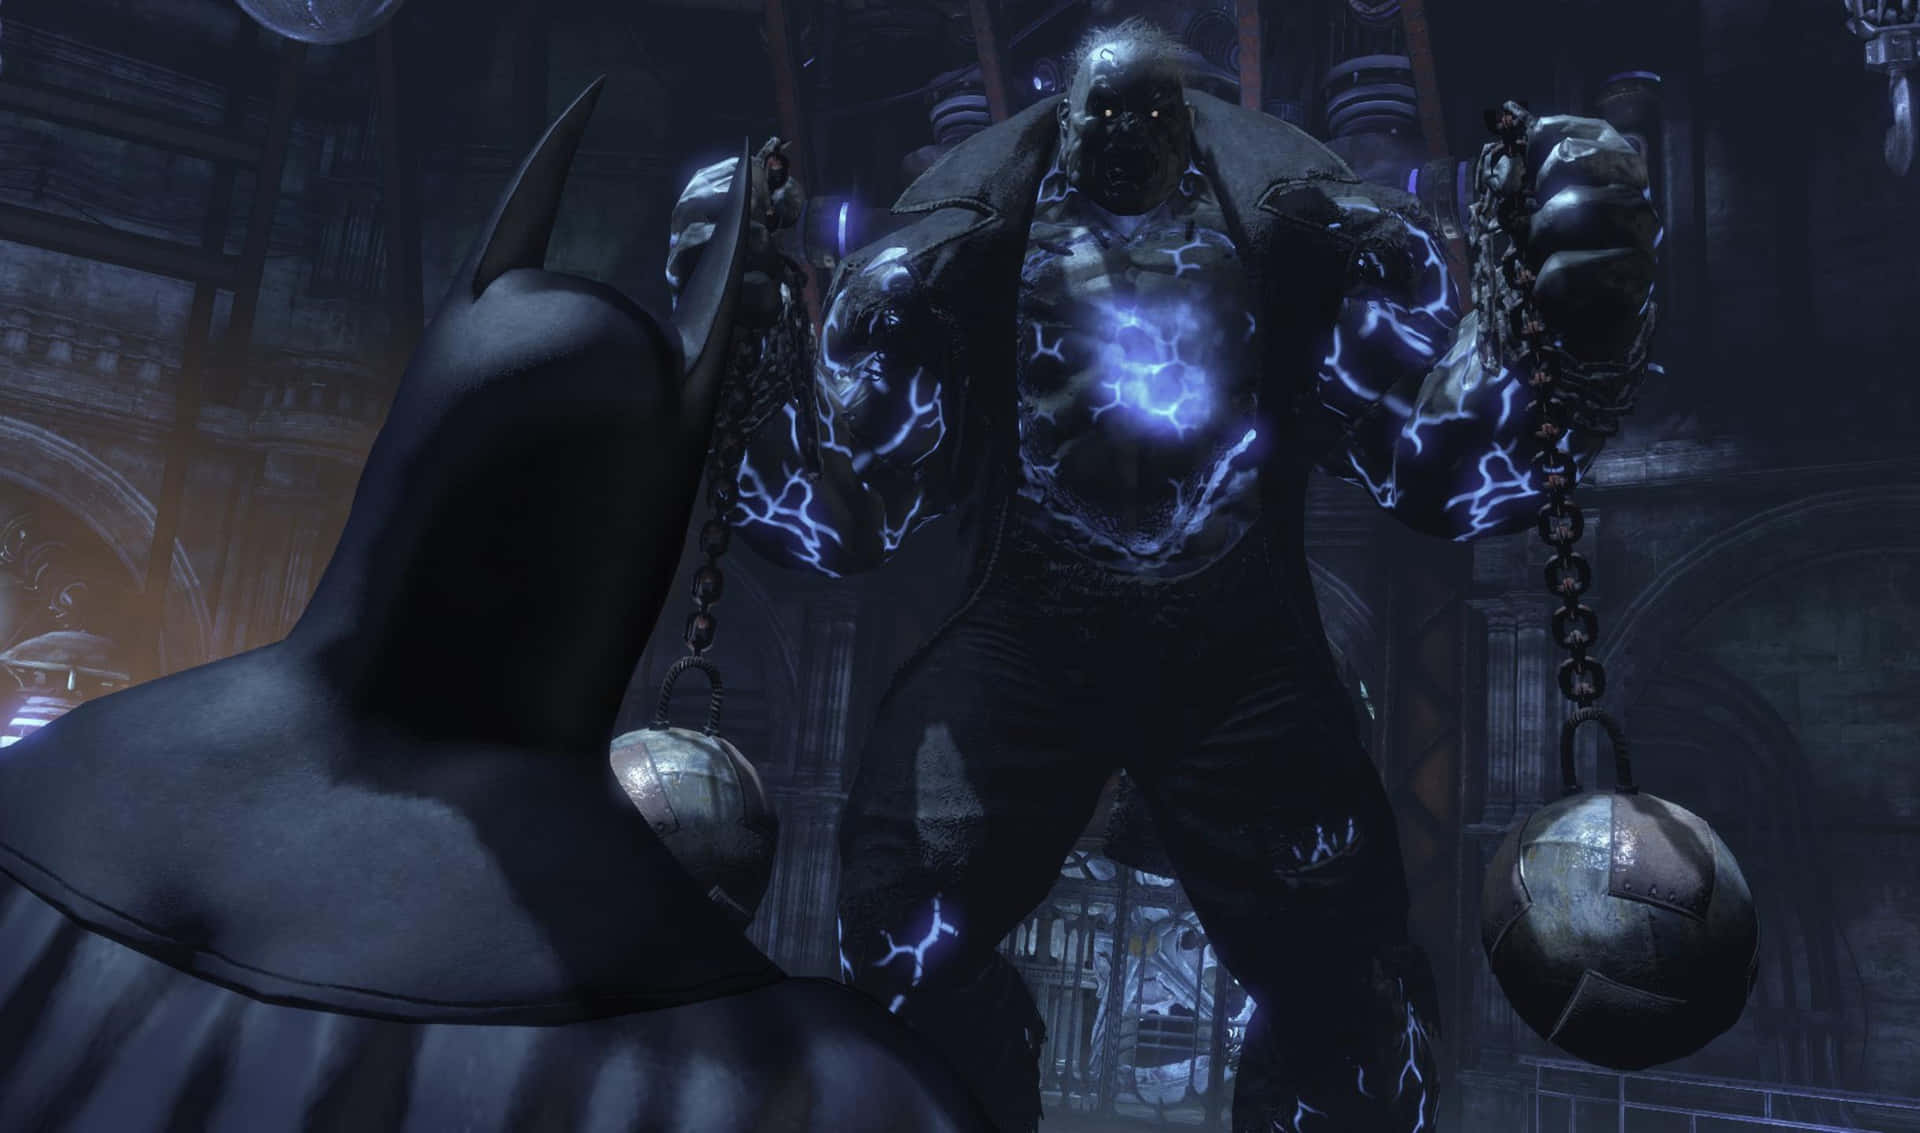 The Dark Knight fights for justice in Batman: Arkham City.